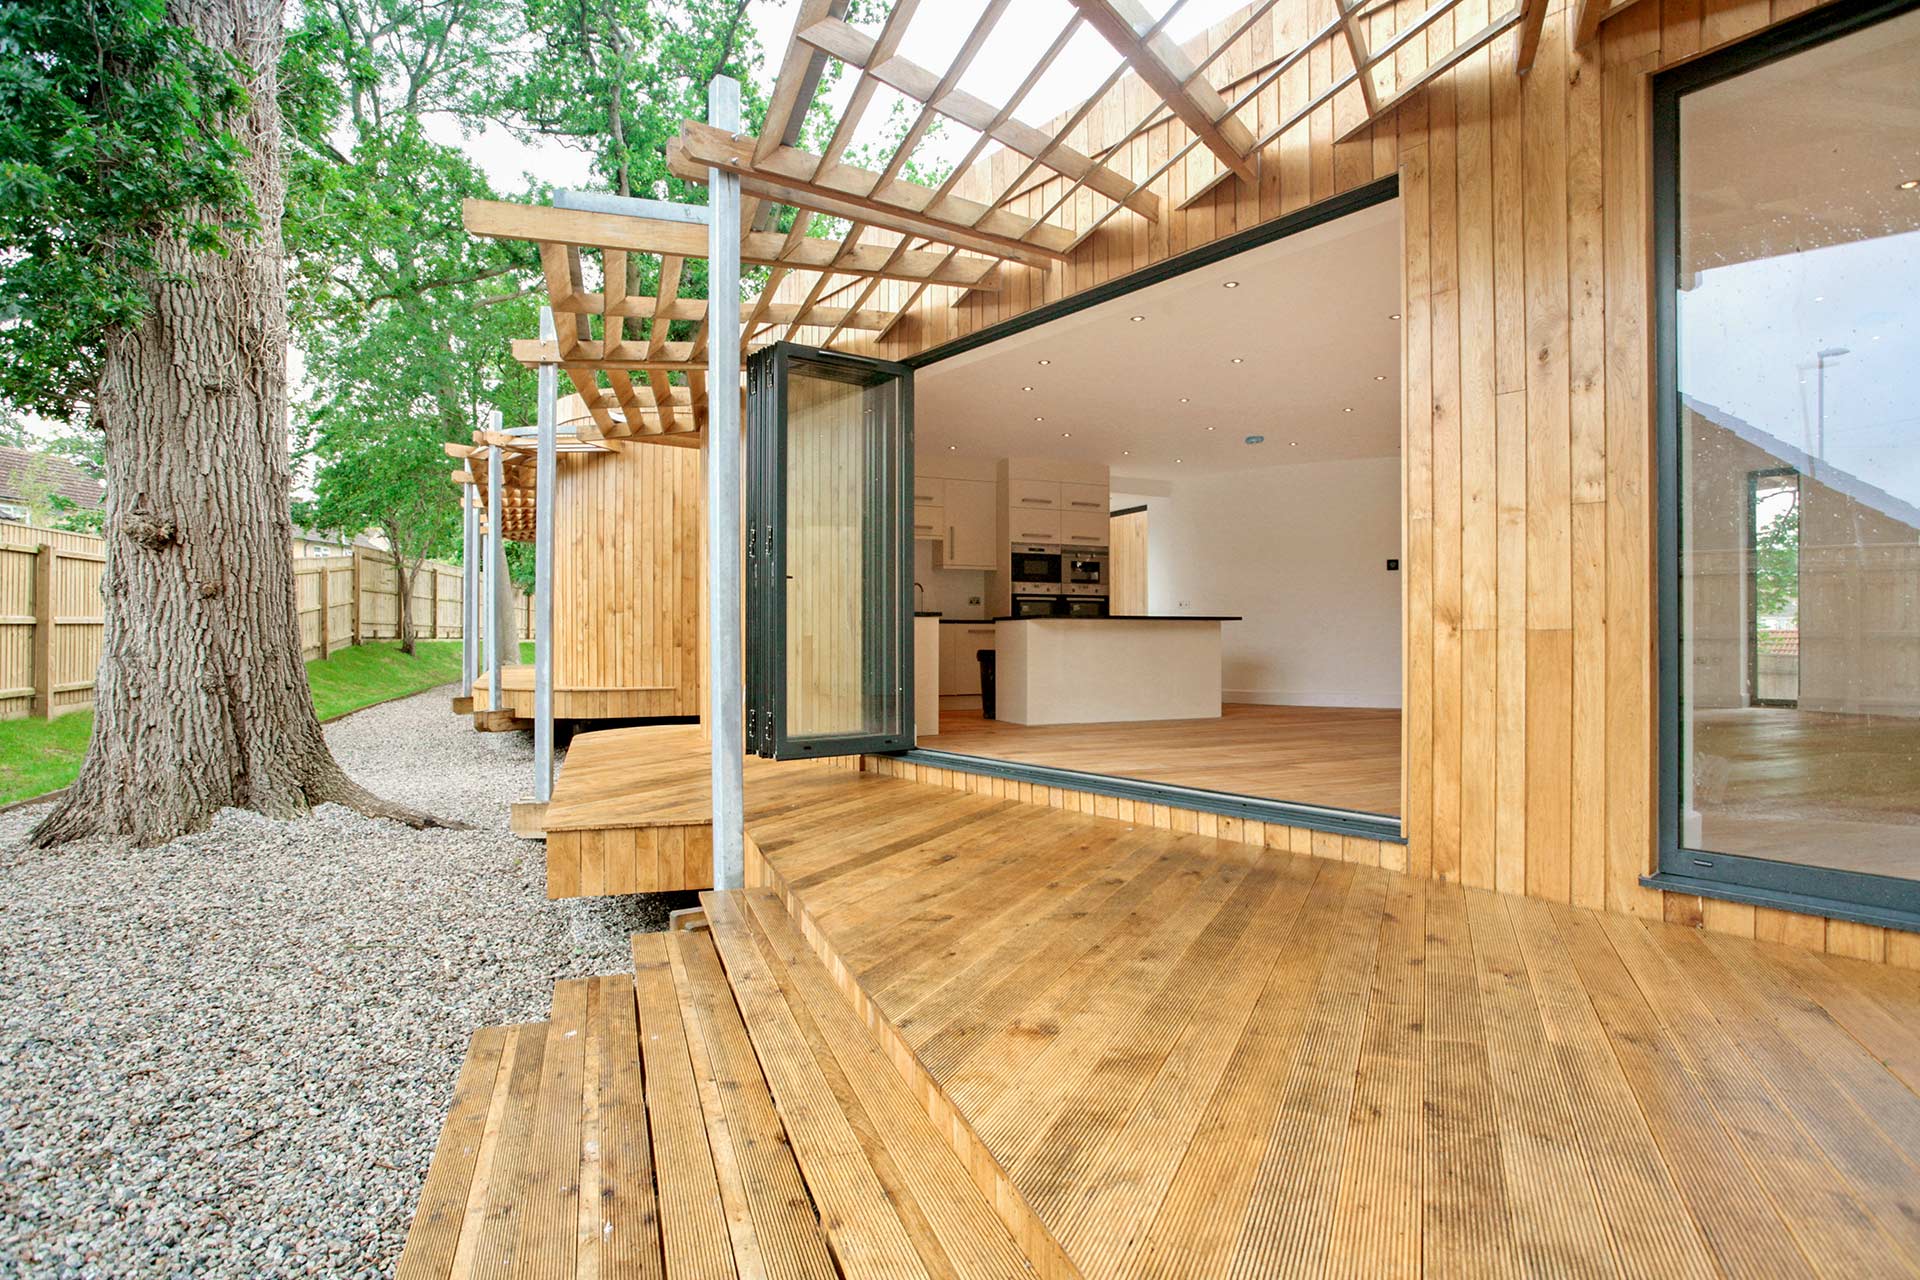 view looking into kitchen living area from decking with timber cladding